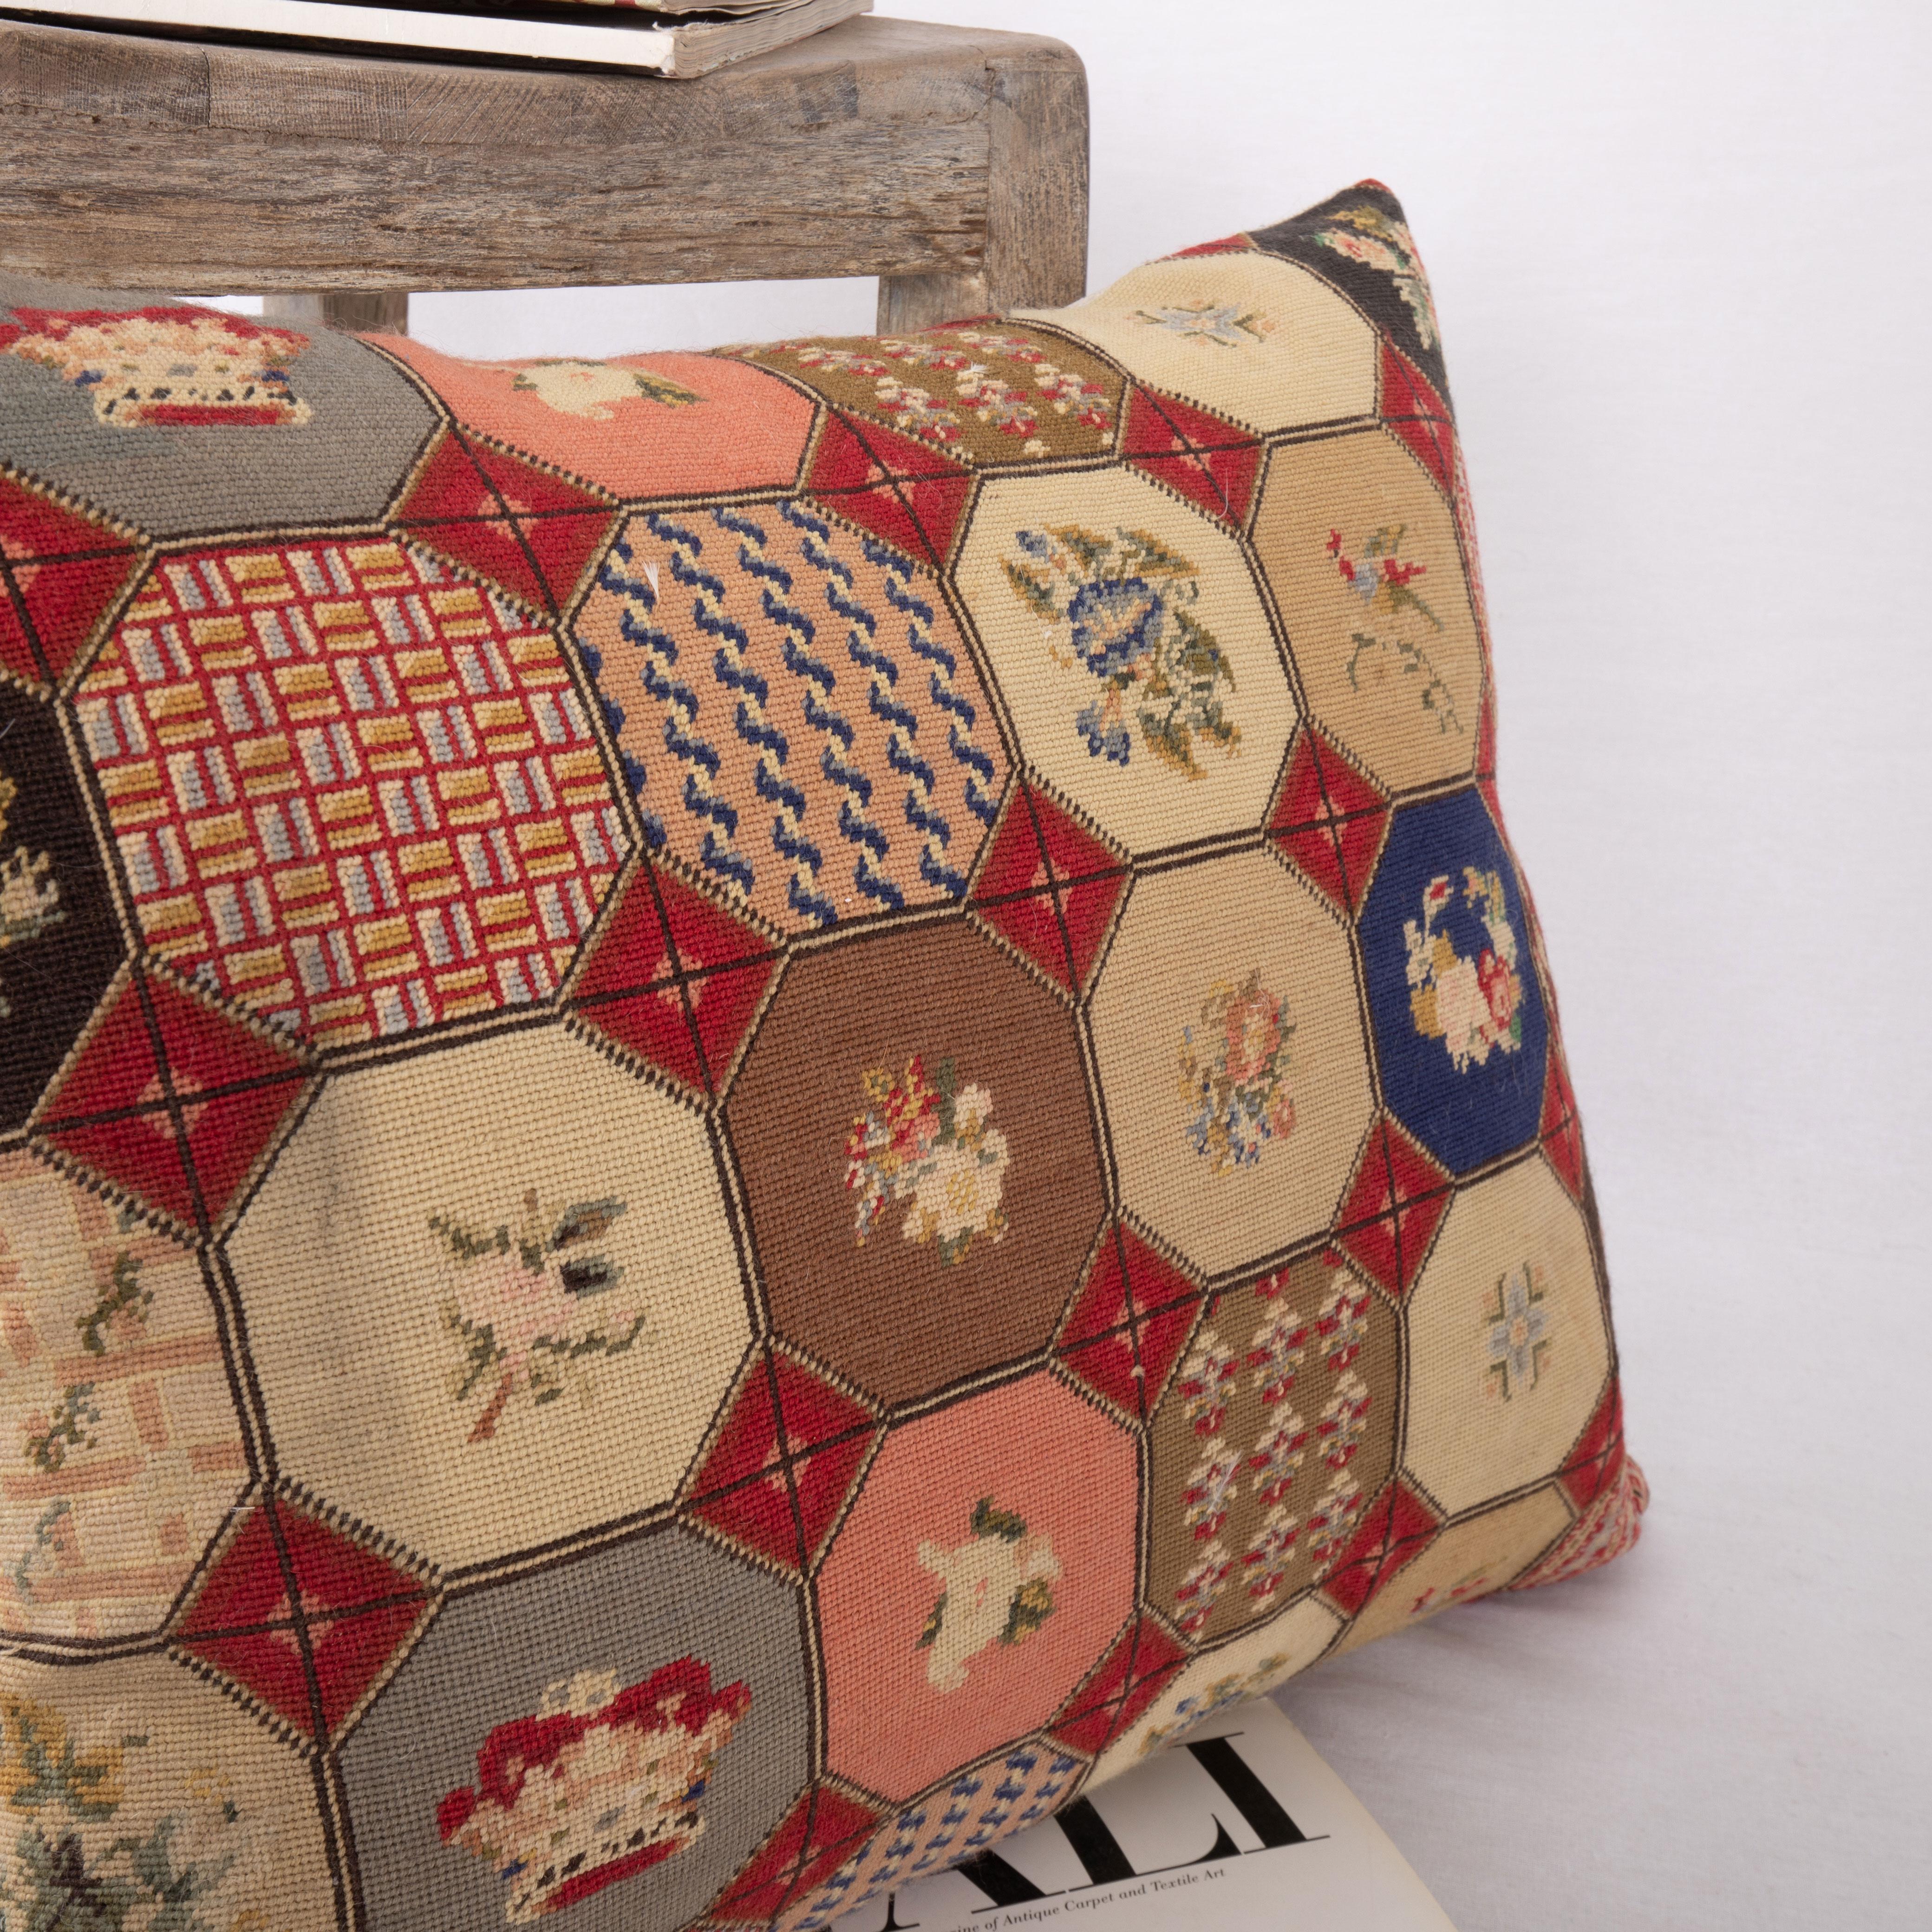 Cotton Pillow Cover Made from an Antique Petit Point European Embroidery Early 20th C.